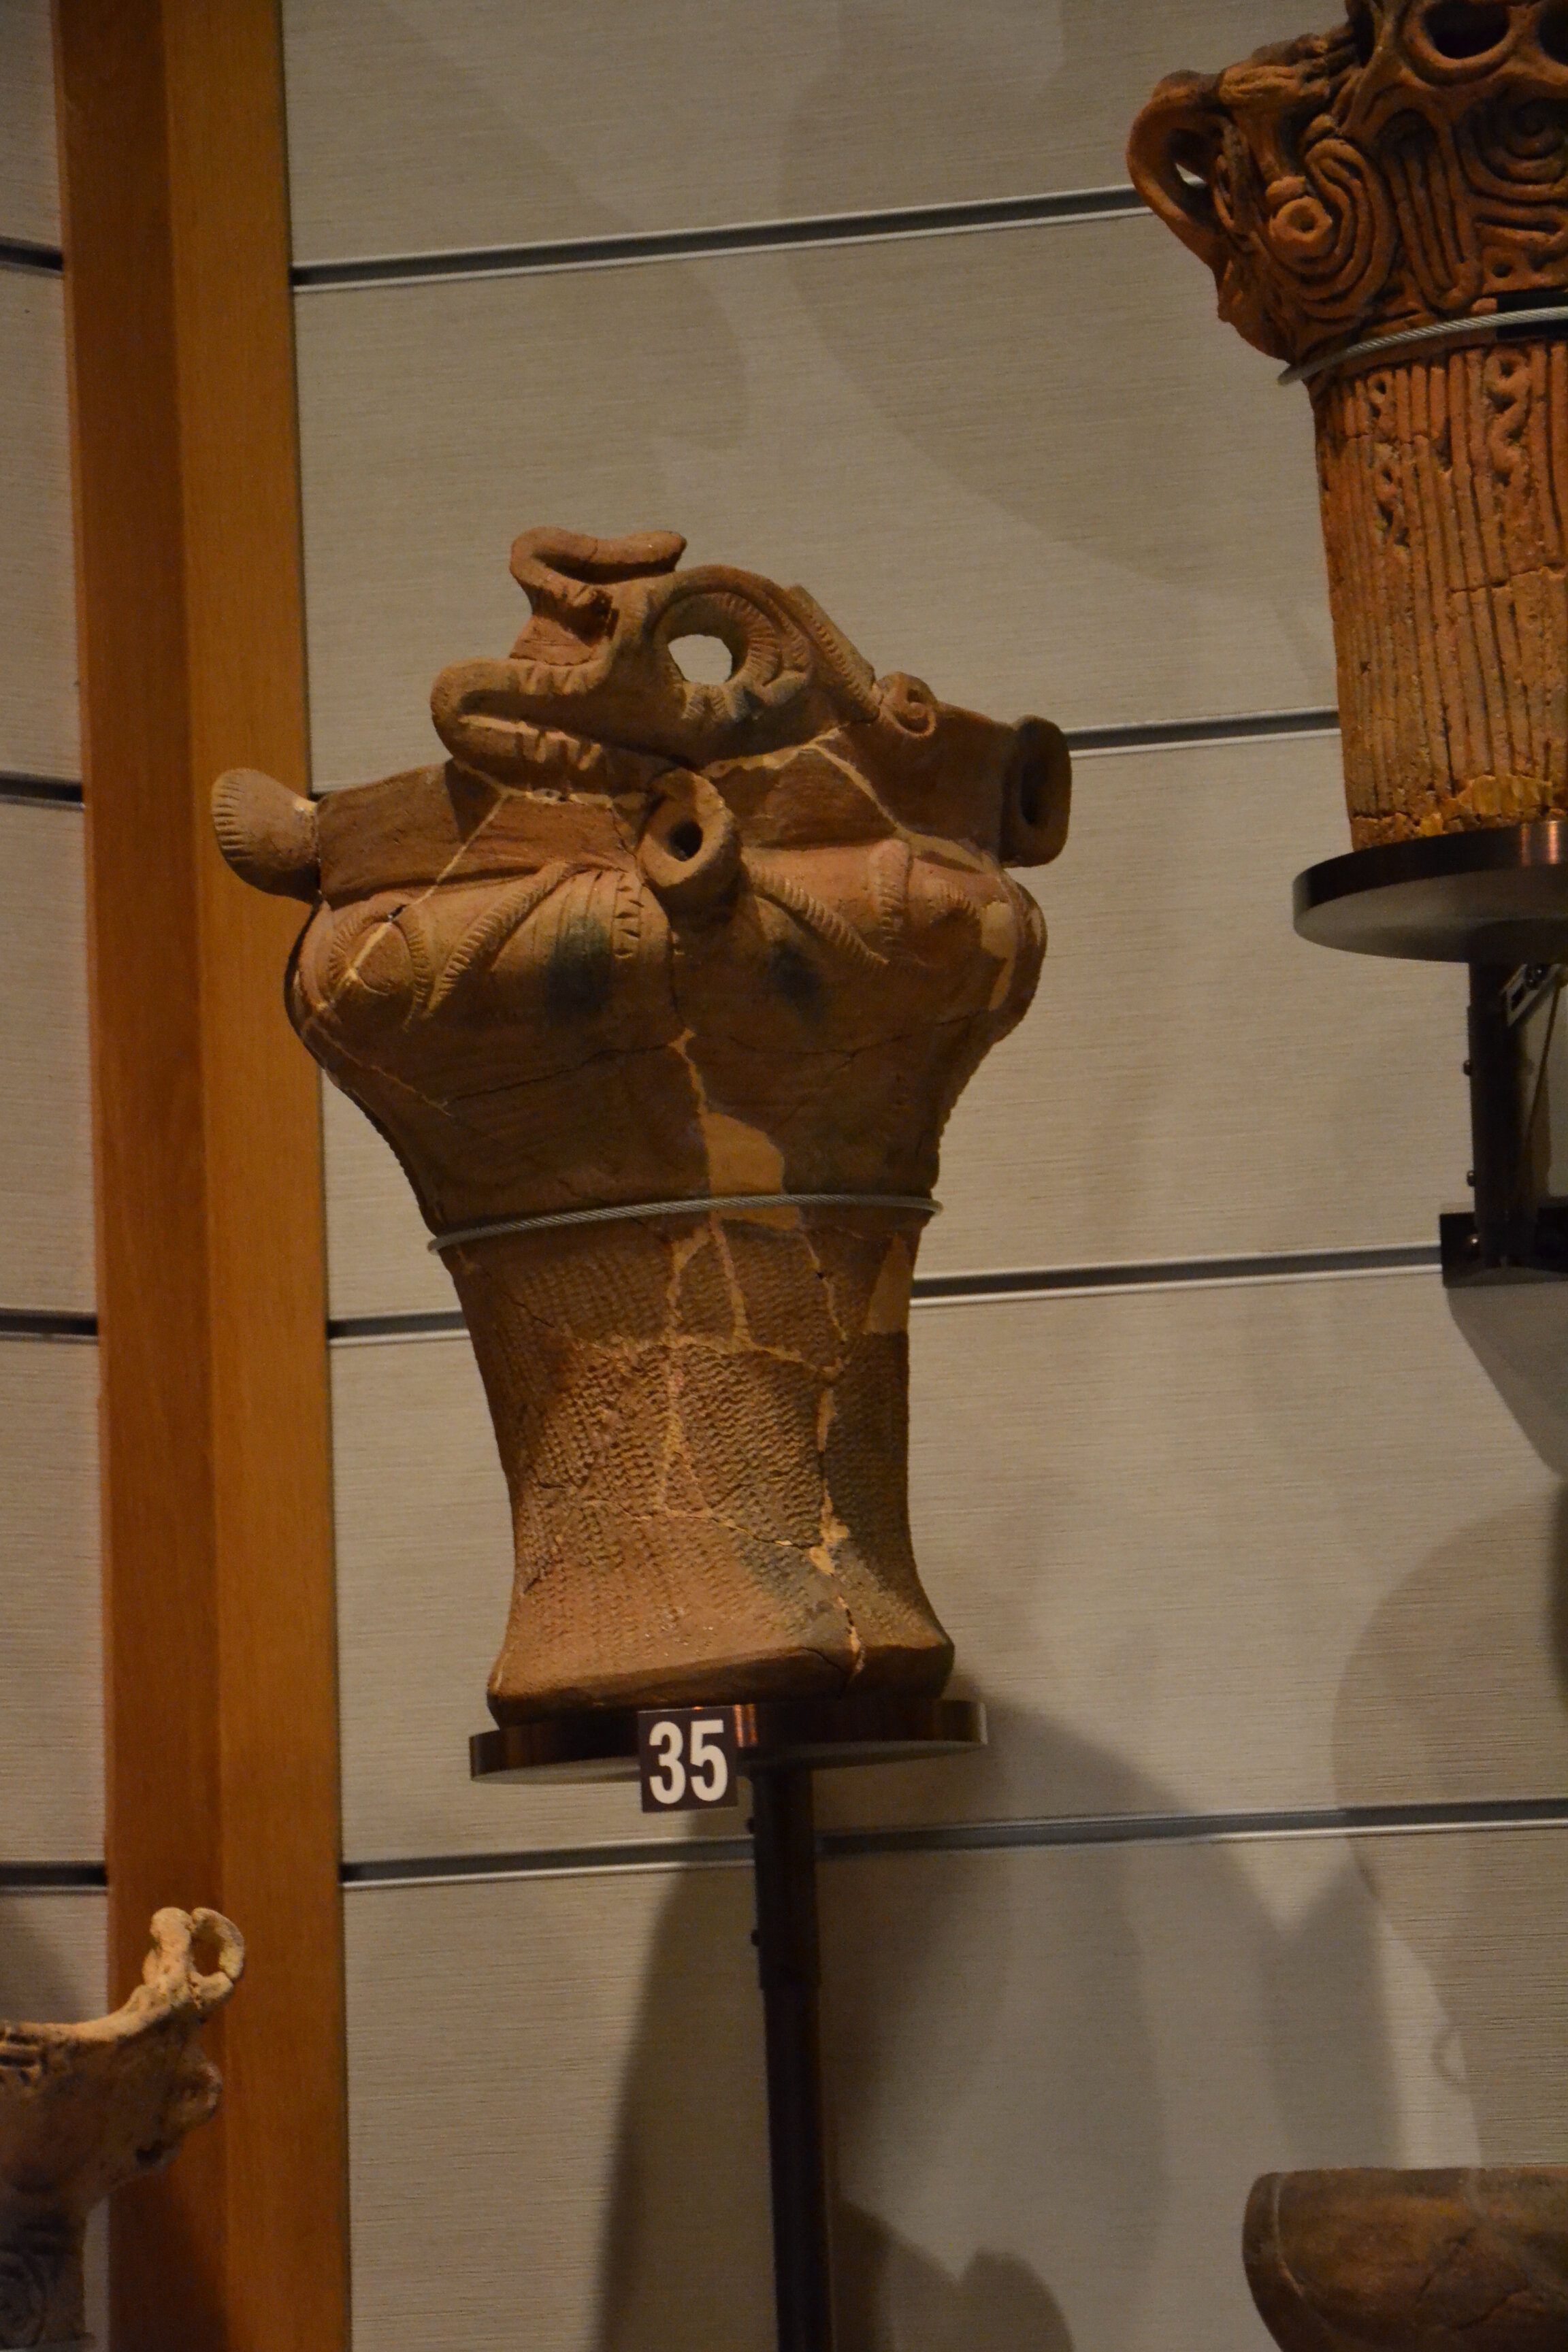  Middle Jomon pottery. Photo by author, taken at the  National Museum of Japanese History  in Sakura, Japan 